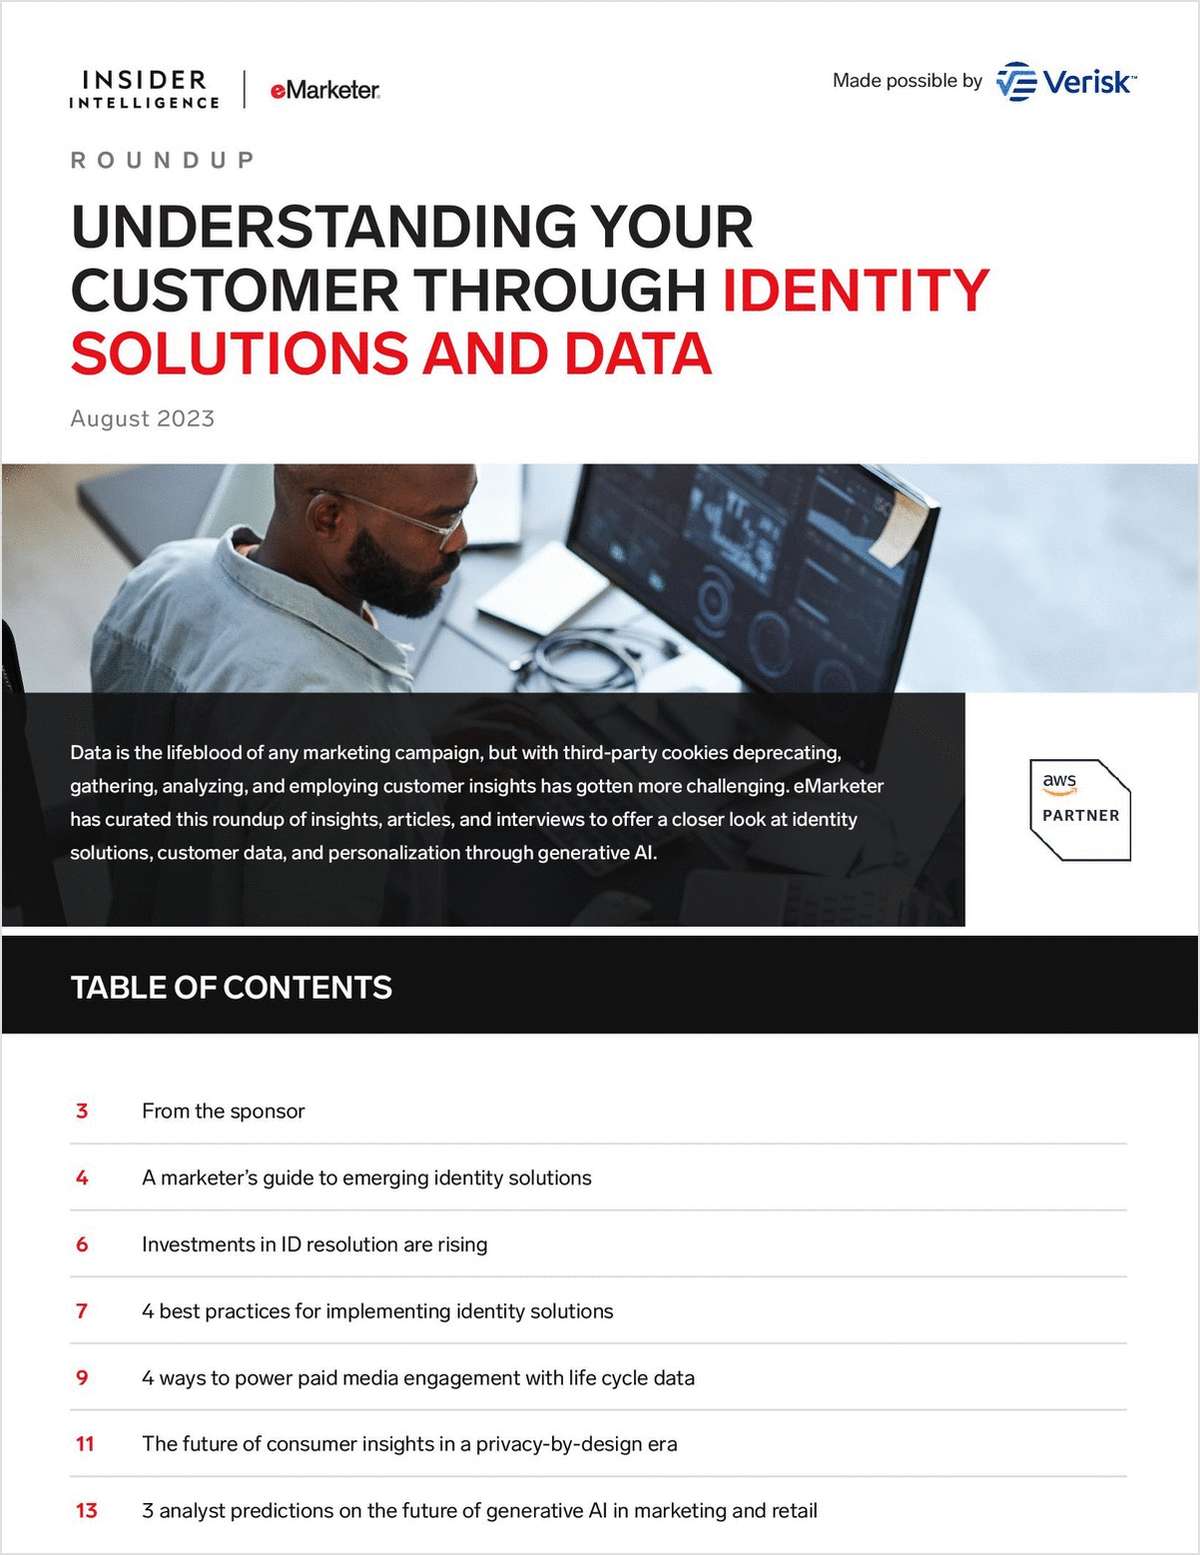 Understanding Your Customer Through Identity Solutions and Data